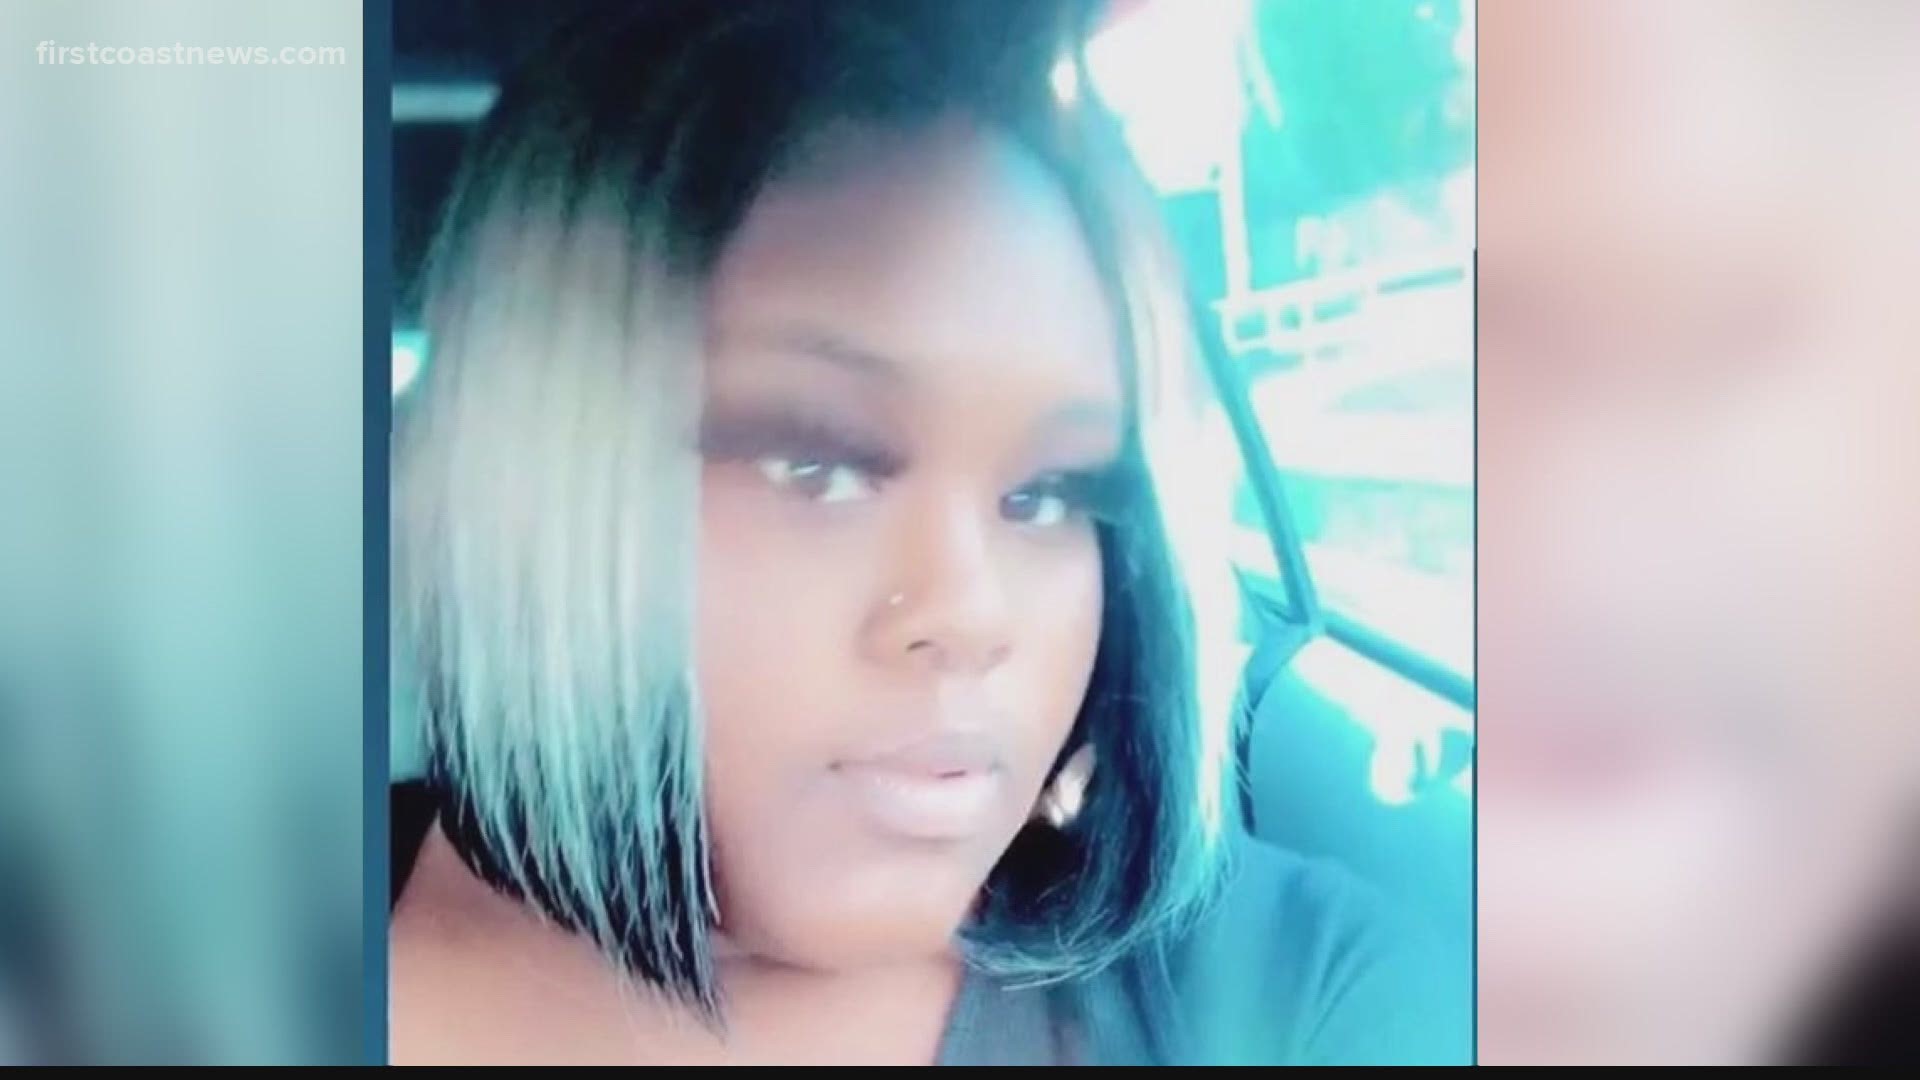 Family and friends identified the teen killed outside Wawa Saturday night as 16-year-old Teneria McClendon.